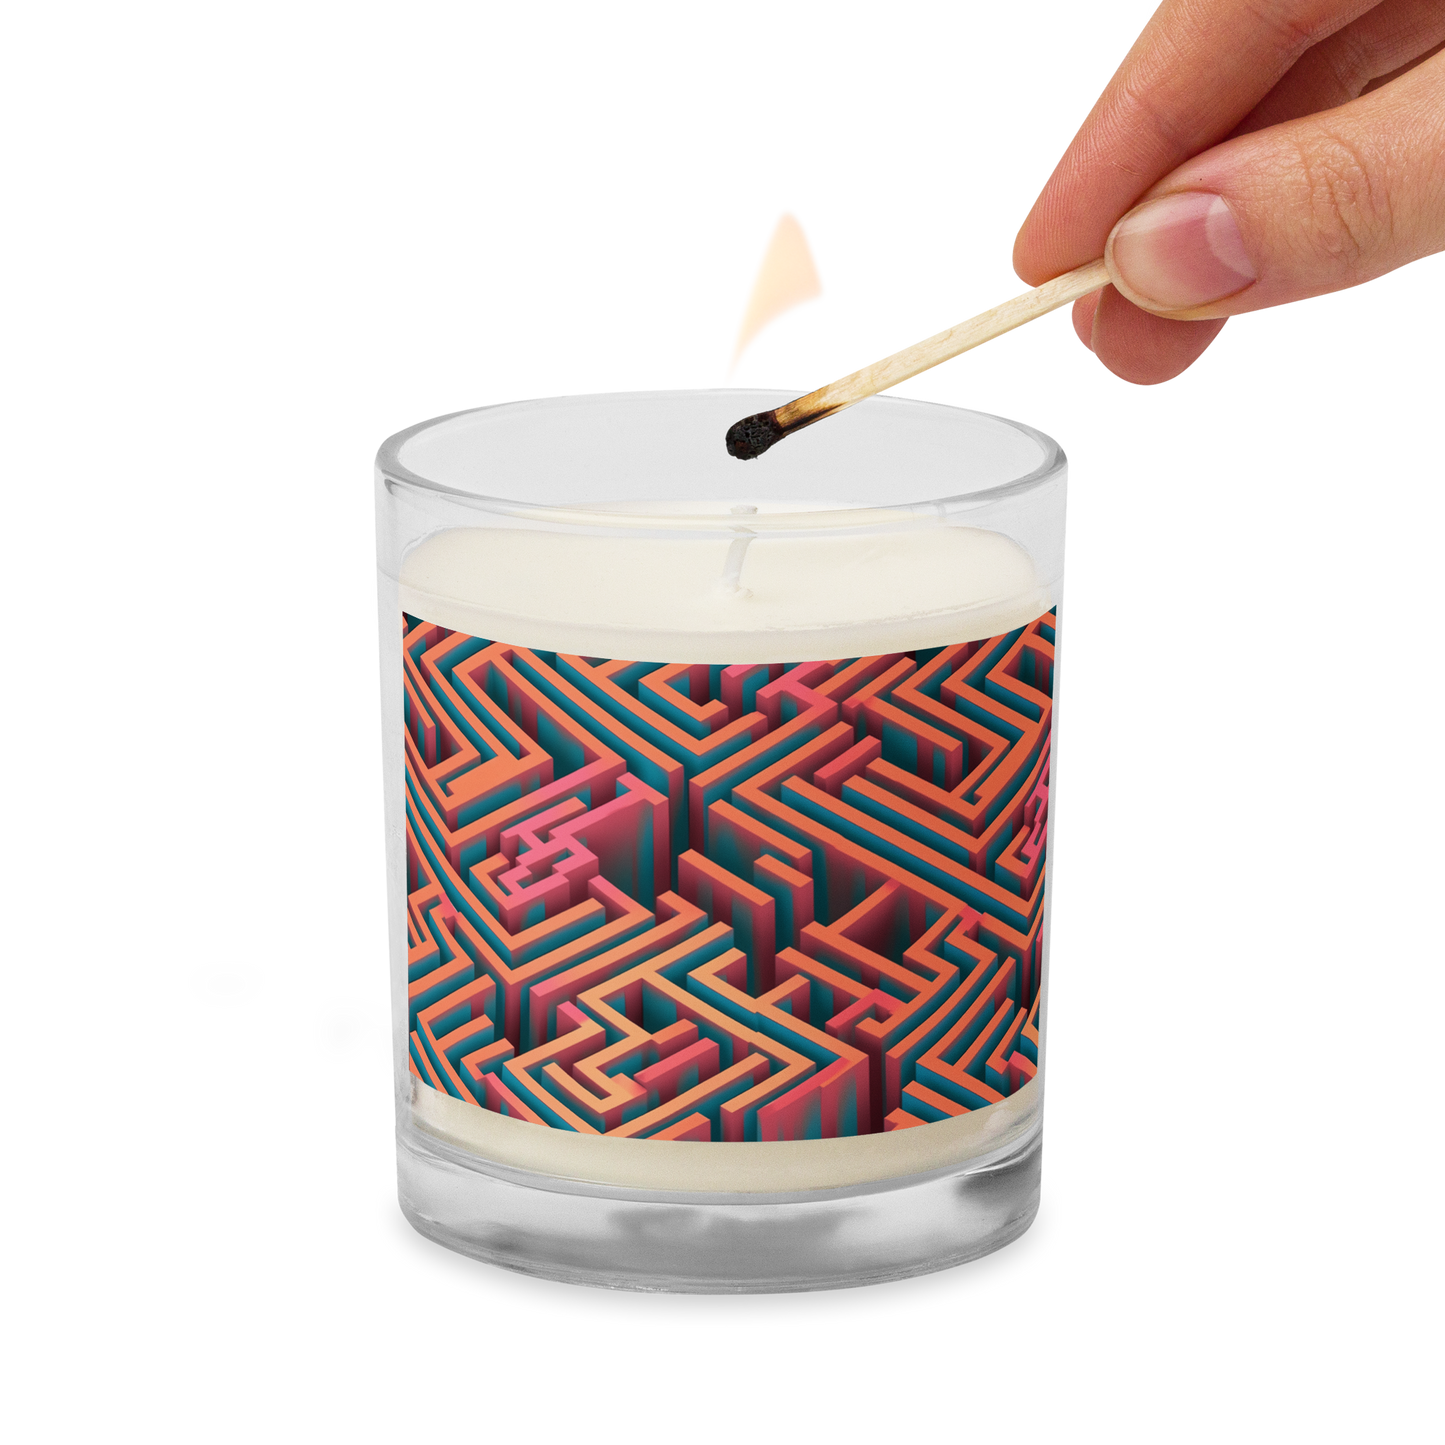 3D Maze Illusion | 3D Patterns | Glass Jar Soy Wax Candle - #1